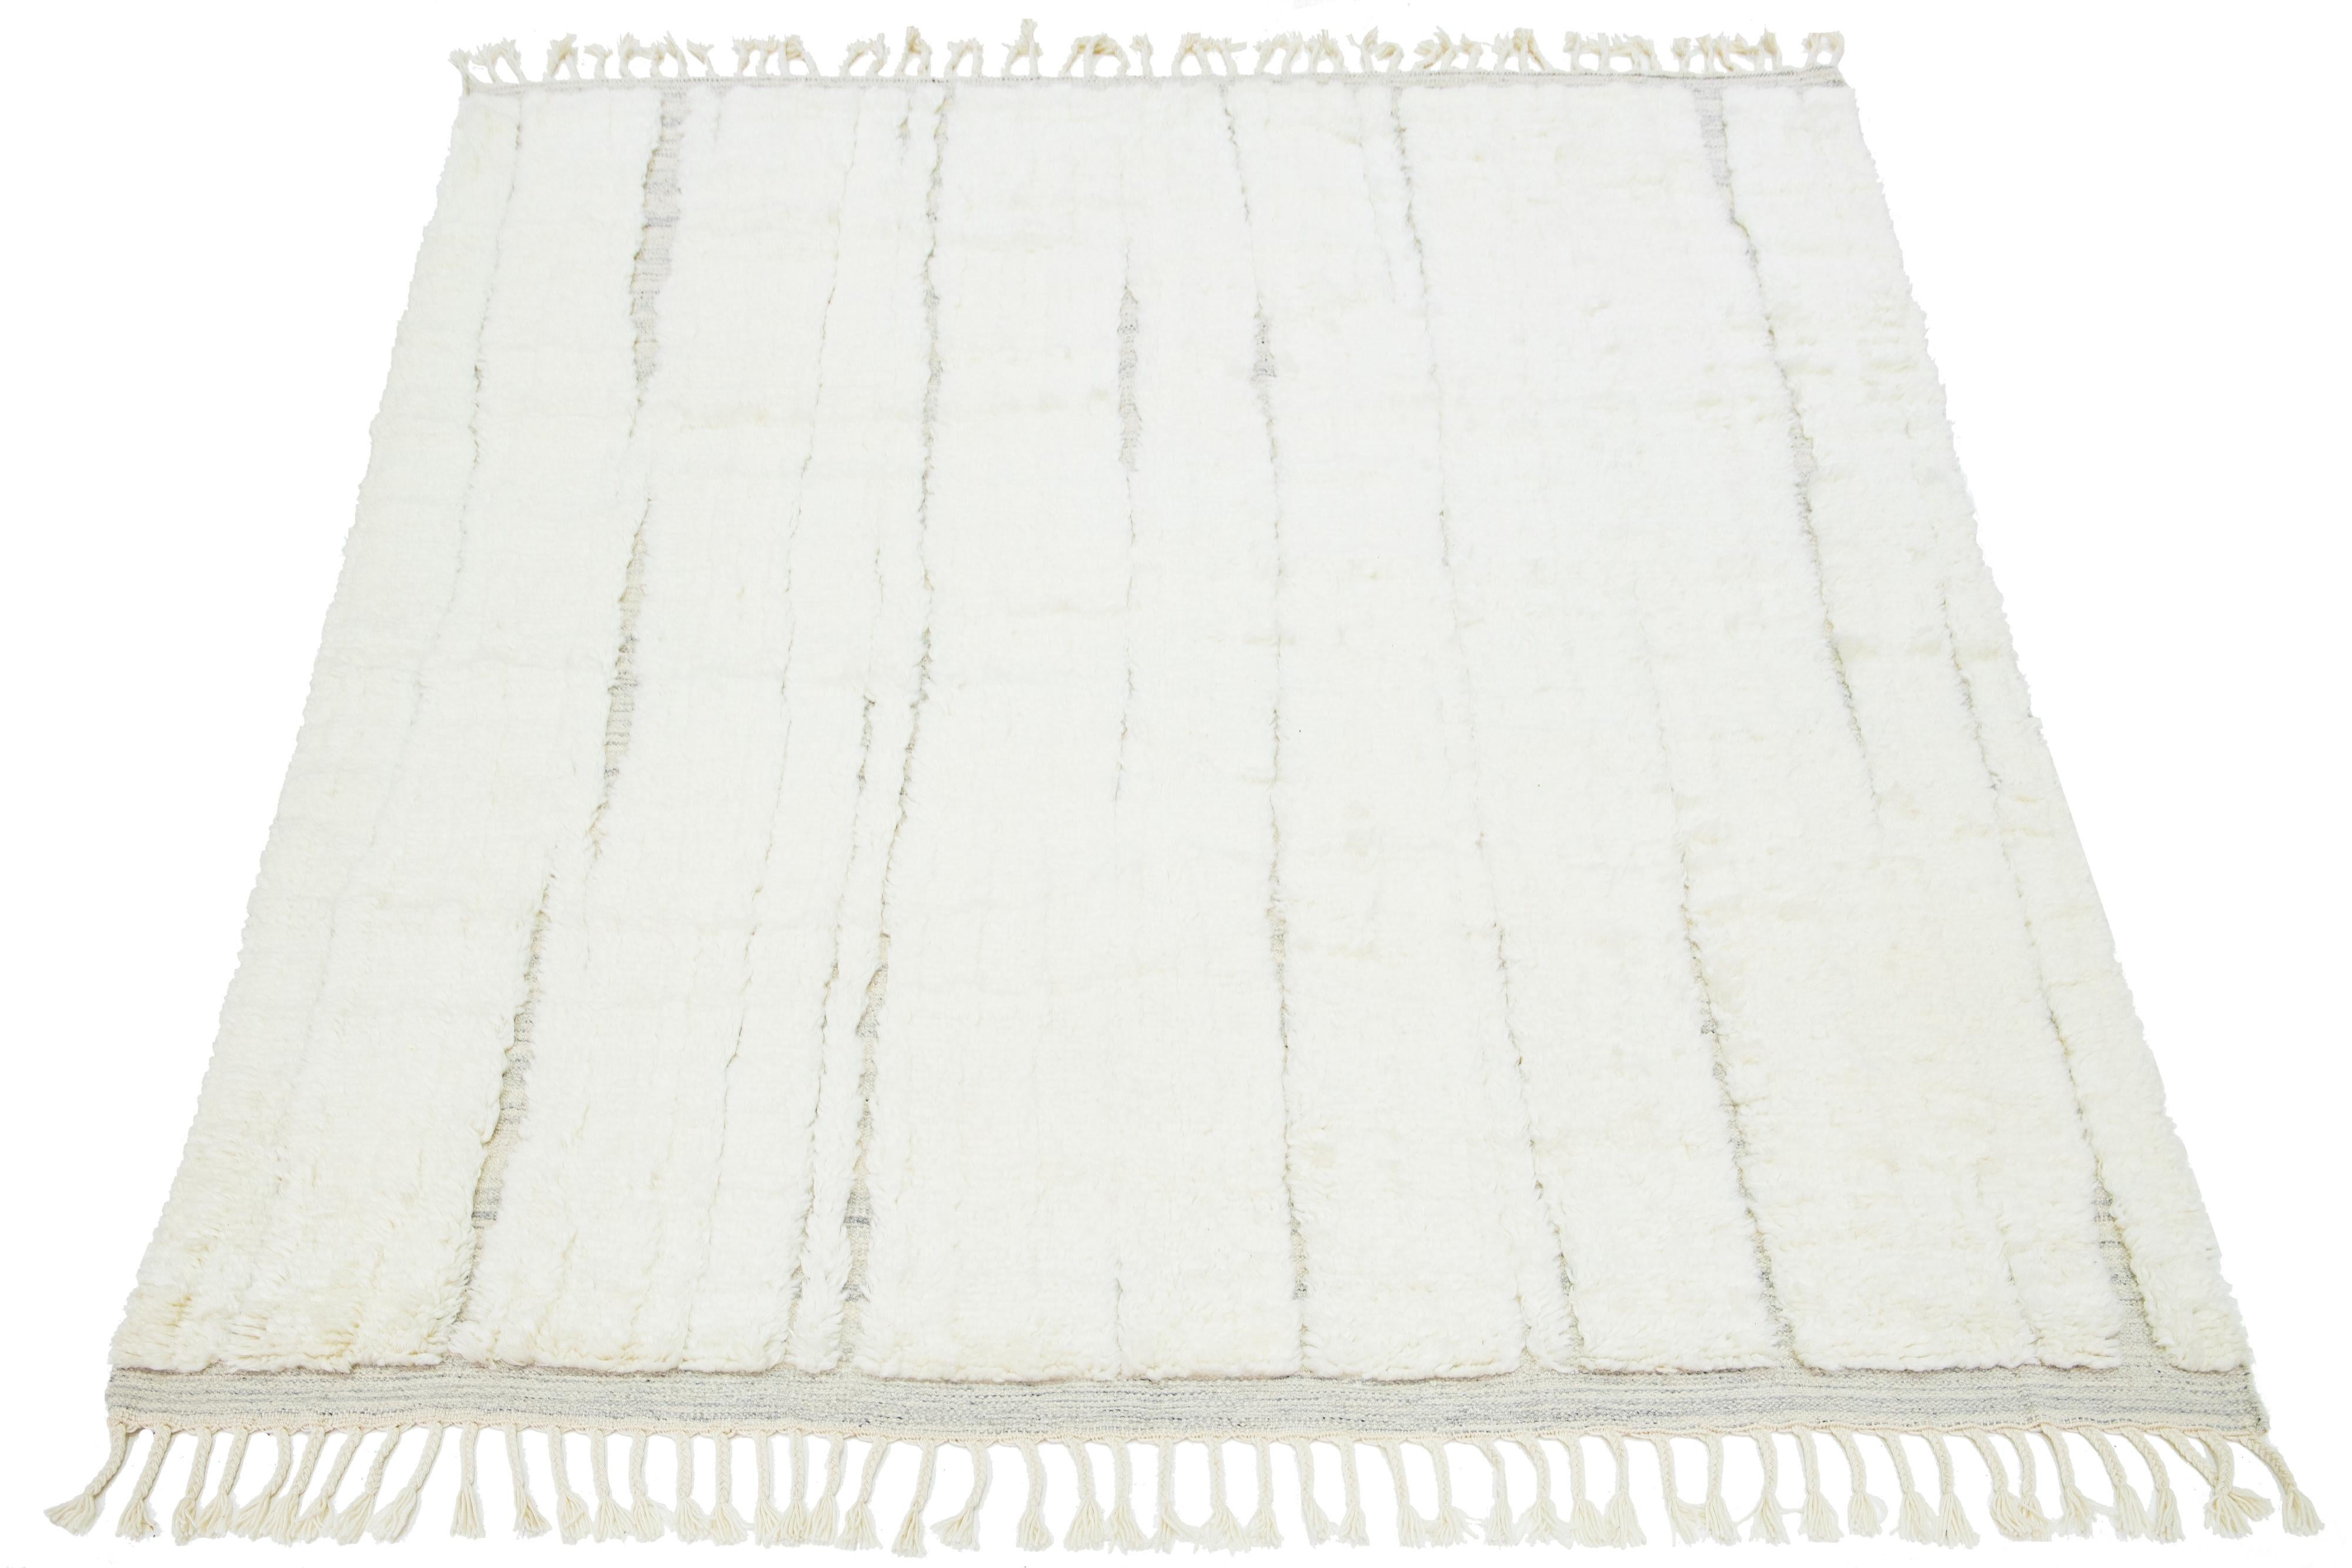 This beautiful, modern Moroccan-style, hand-knotted wool rug features a natural ivory field. It is a part of our Apadana Safi Collection and highlights a stunning, soft, linear design with fringes on the ends.

This rug measures 8' x 10'.